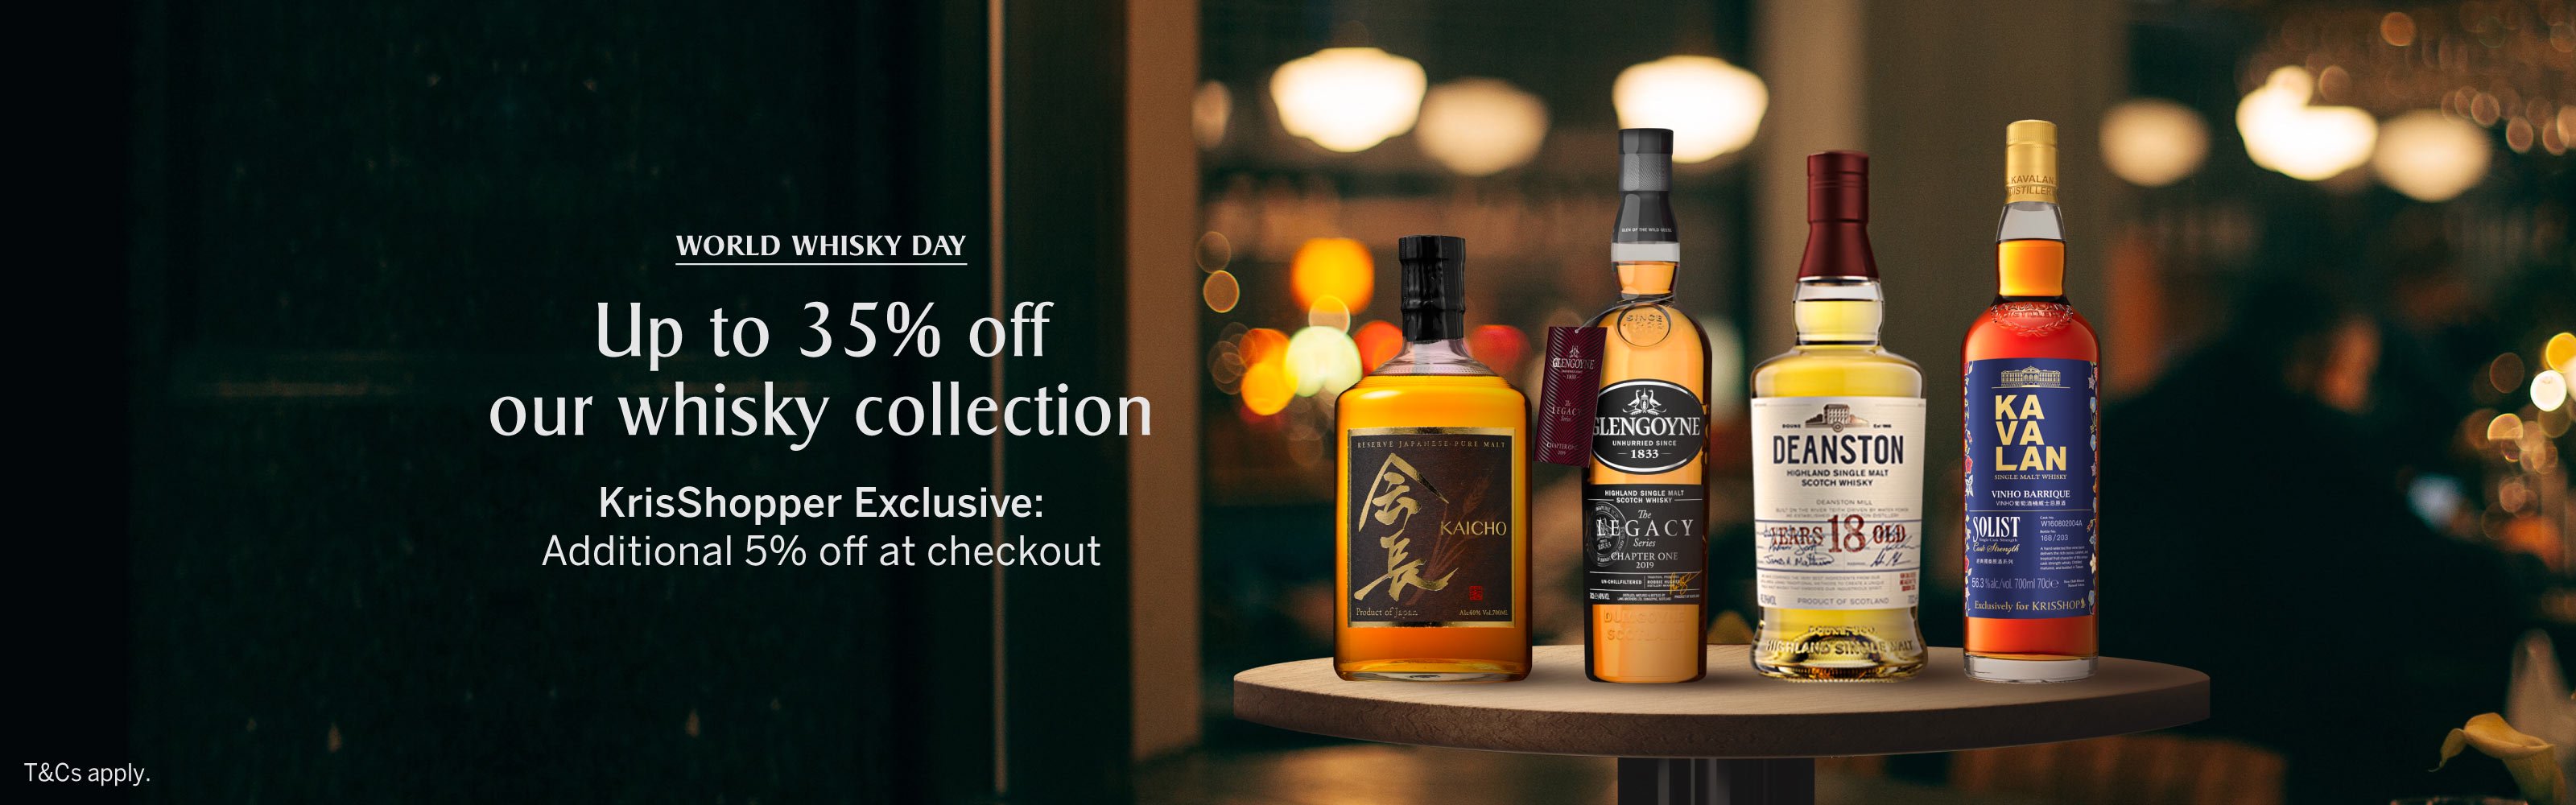 Celebrating World Whisky Day Special - Up to 35% off whisky